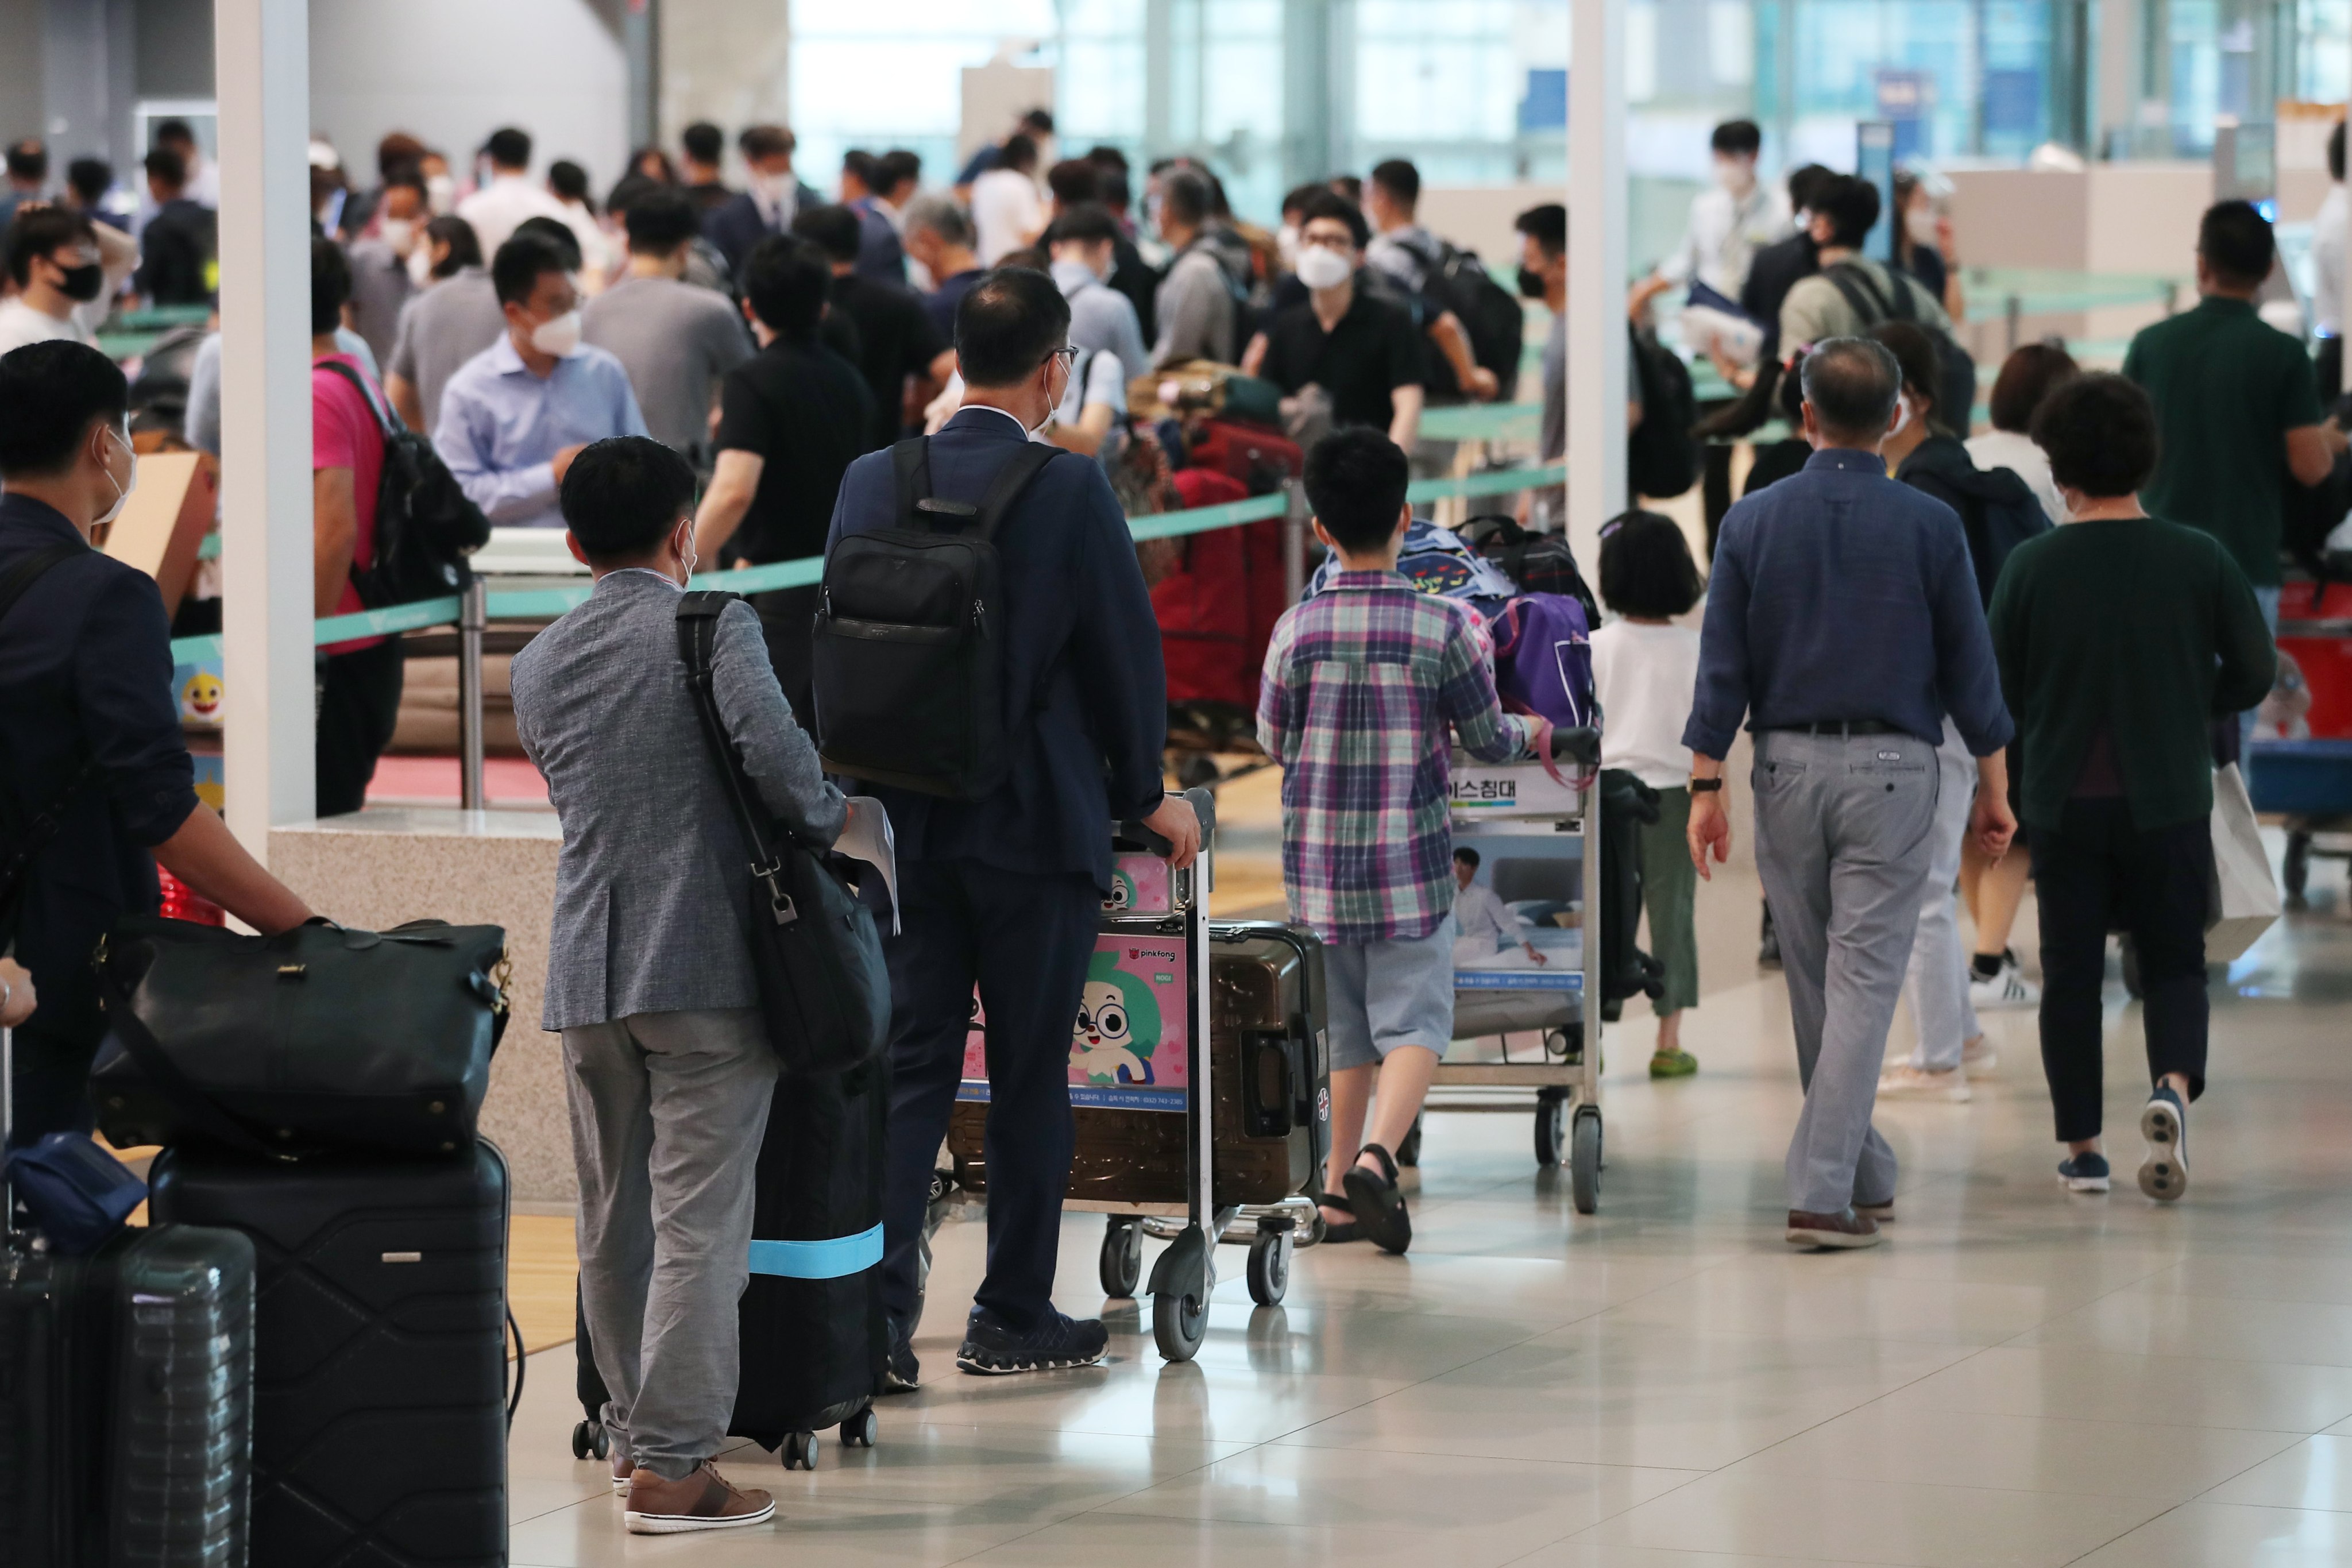 South Koreans queue in the departure lobby of Incheon airport. The North’s balloons briefly forced a three-hour halt to flights at the airport last month. Photo: Yonhap via EPA-EFE